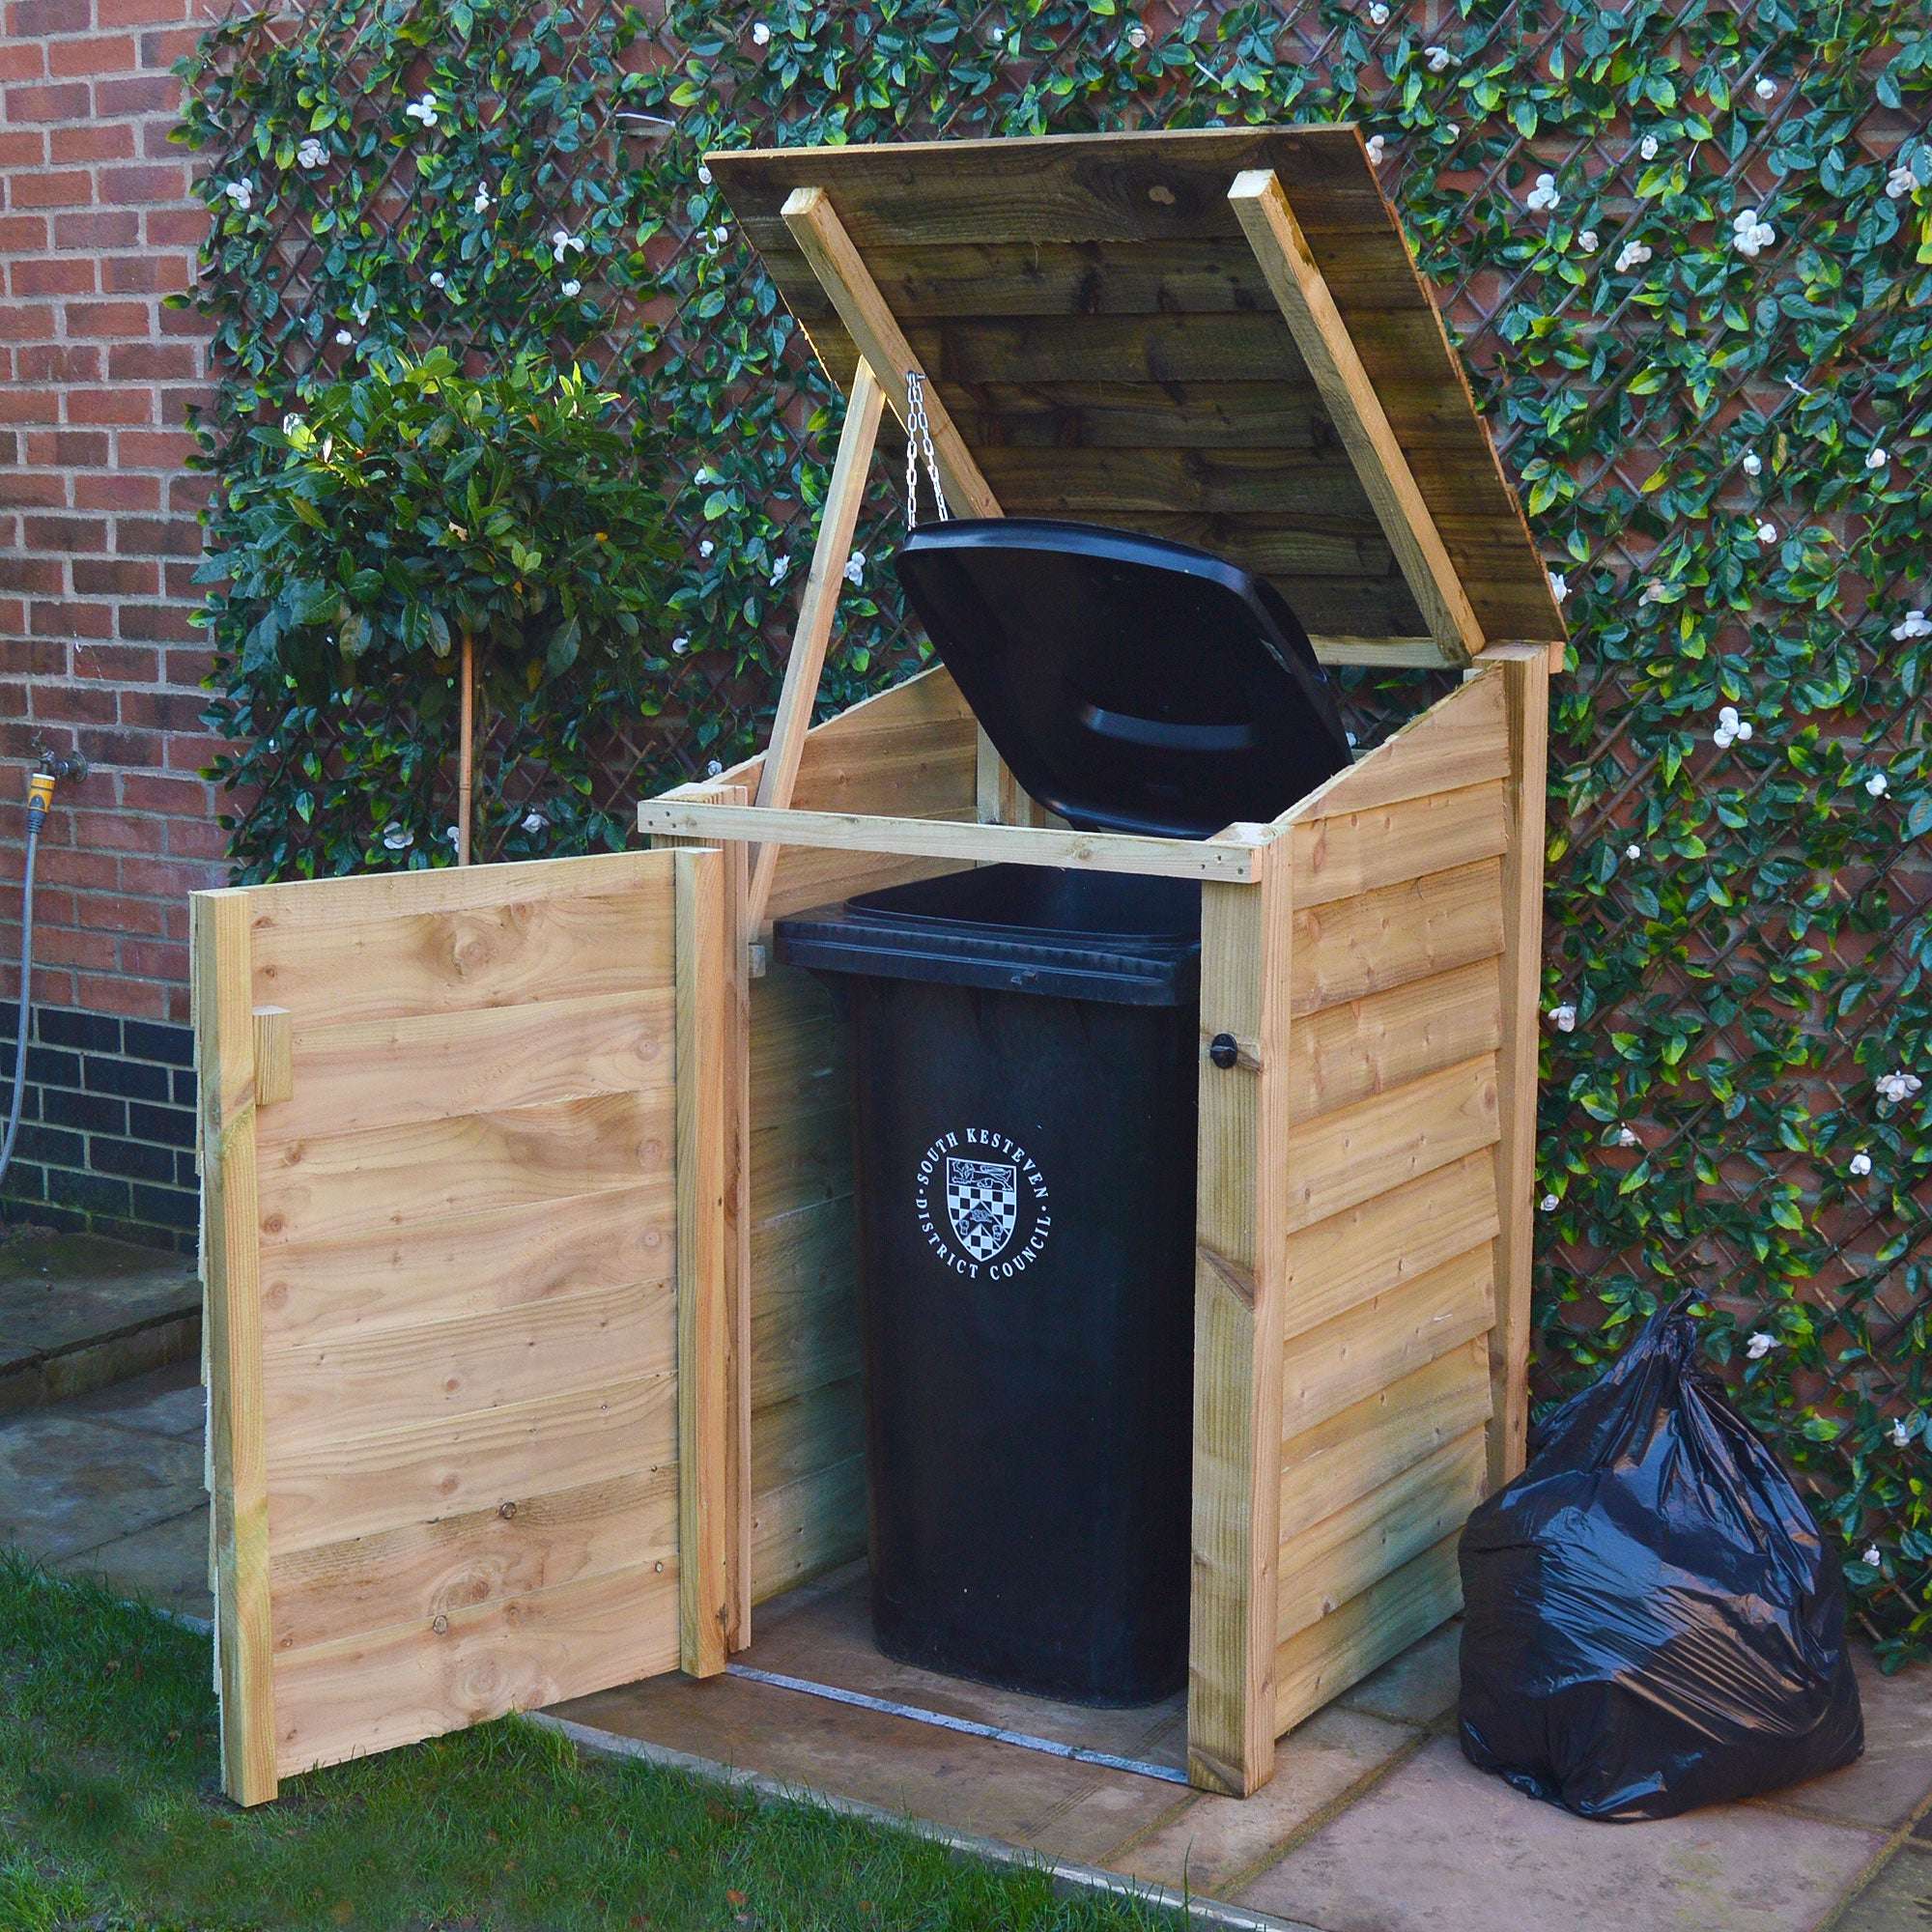 Rutland Country Morcott Single Recycling Storage Unit:Rutland County,Exceptional Garden